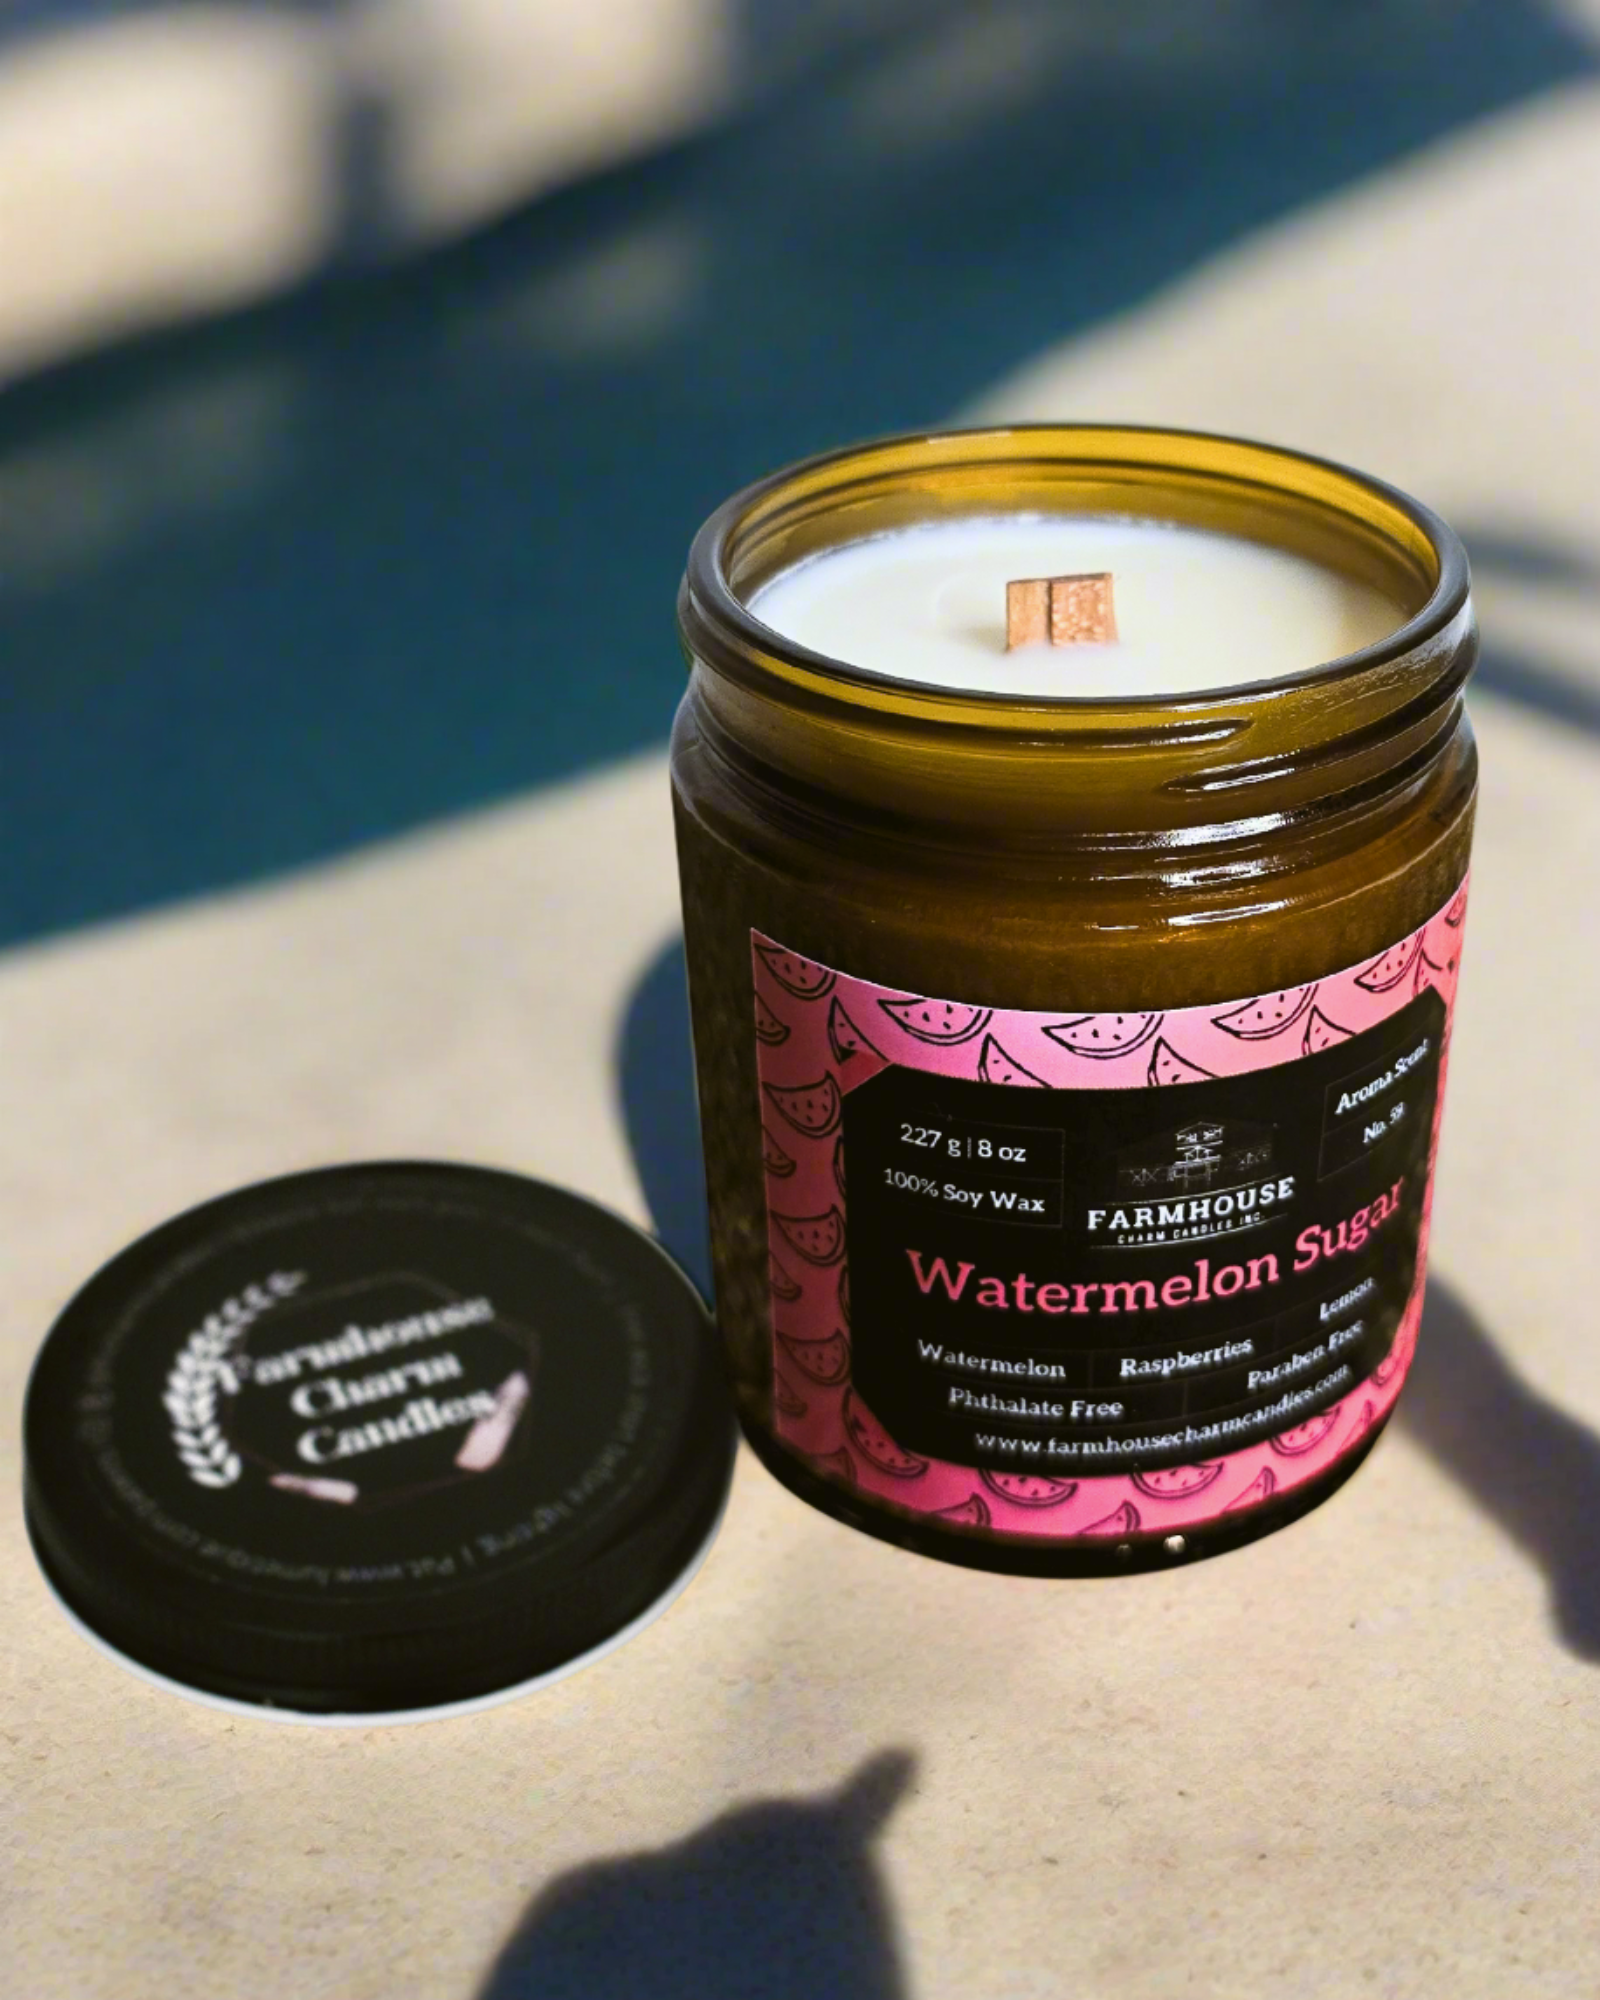 Relive the sweet memories of summer with our newest blend - the Watermelon Sugar Soy Candle - Aroma Scent No. 59! This delightful candle is a perfect mix of juicy watermelon, sweet raspberries, and zesty lemon, whisking you away to sunny days and cool, refreshing treats. It’s like tasting strawberries on a warm summer evening and hearing your favorite song. You’ll crave more of those summer vibes with its wonderful, warm glow. www.farmhousecharmcandles.com